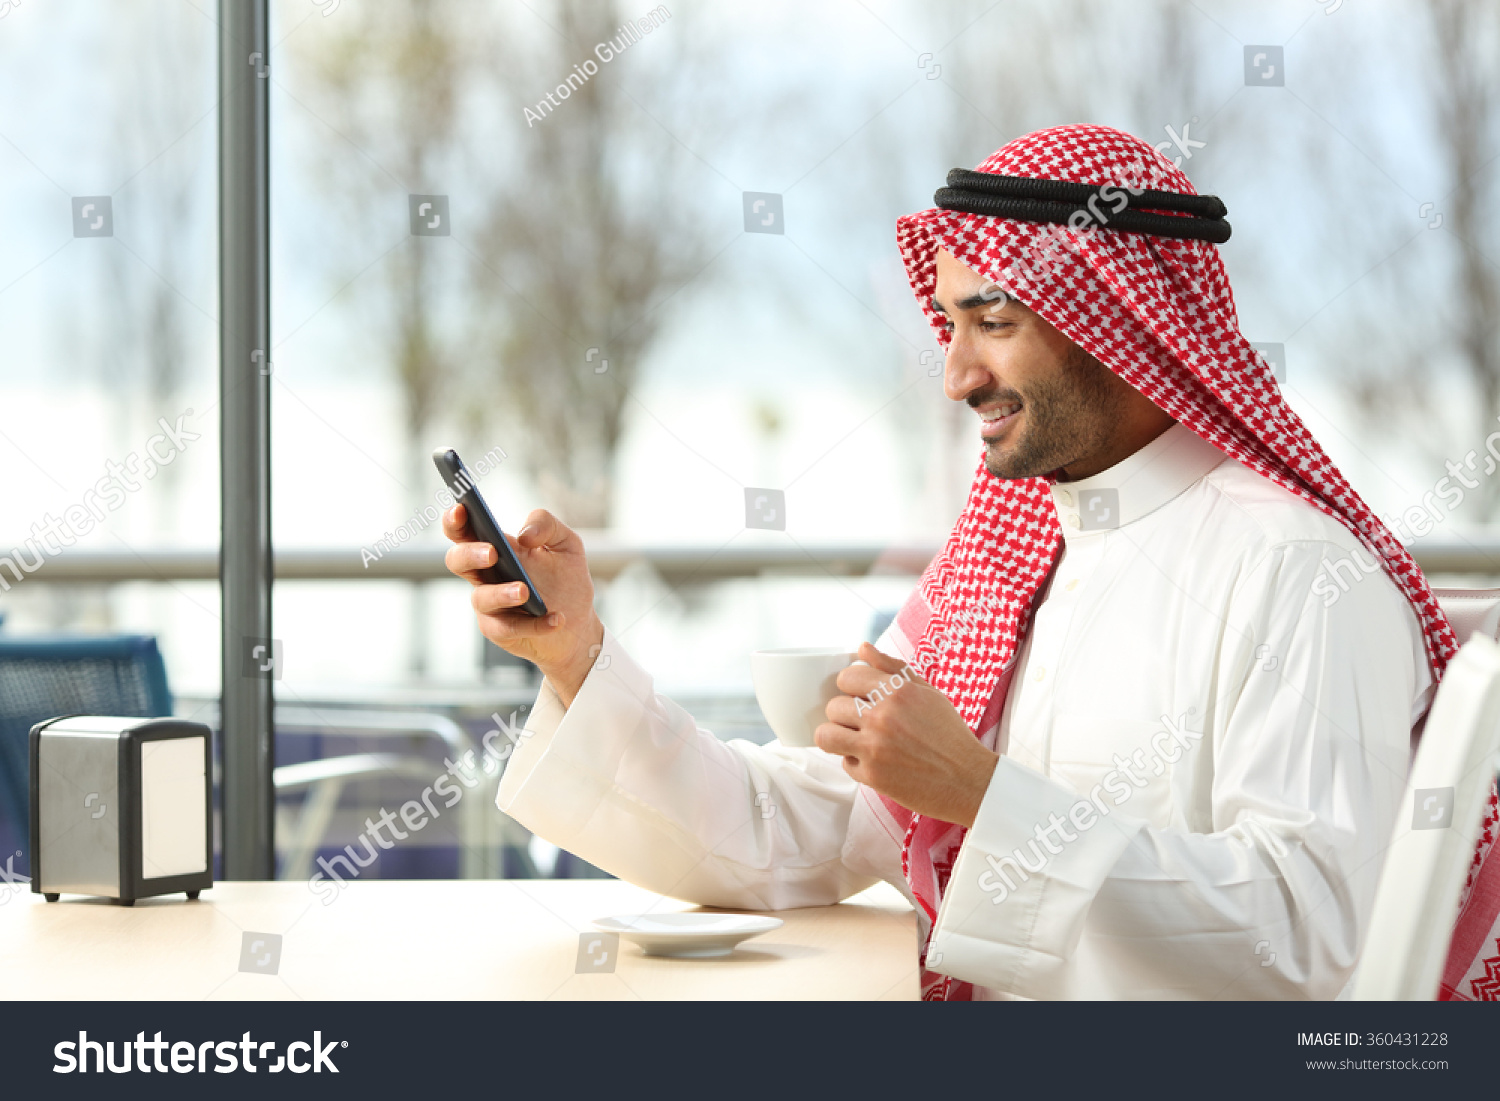 Side view of an arab man texting in a smart phone in a coffee shop with a window with a sunny day in the background #360431228